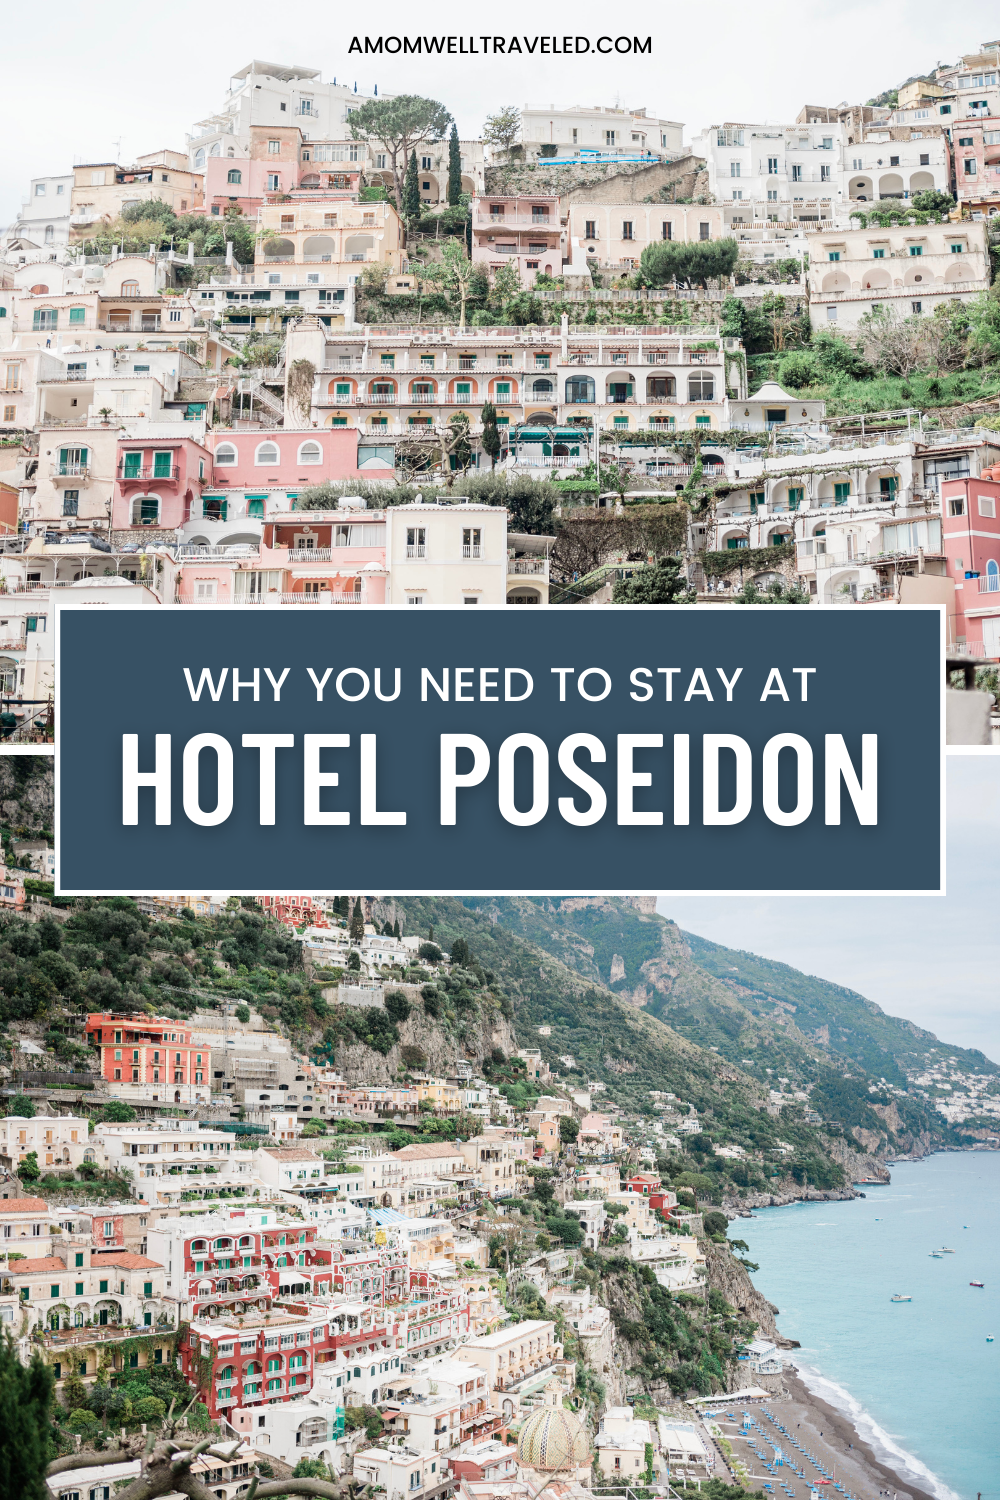 Pinterest Pin Why Hotel Poseidon in Positano is worth the splurge as featured on A Mom Well Traveled blog